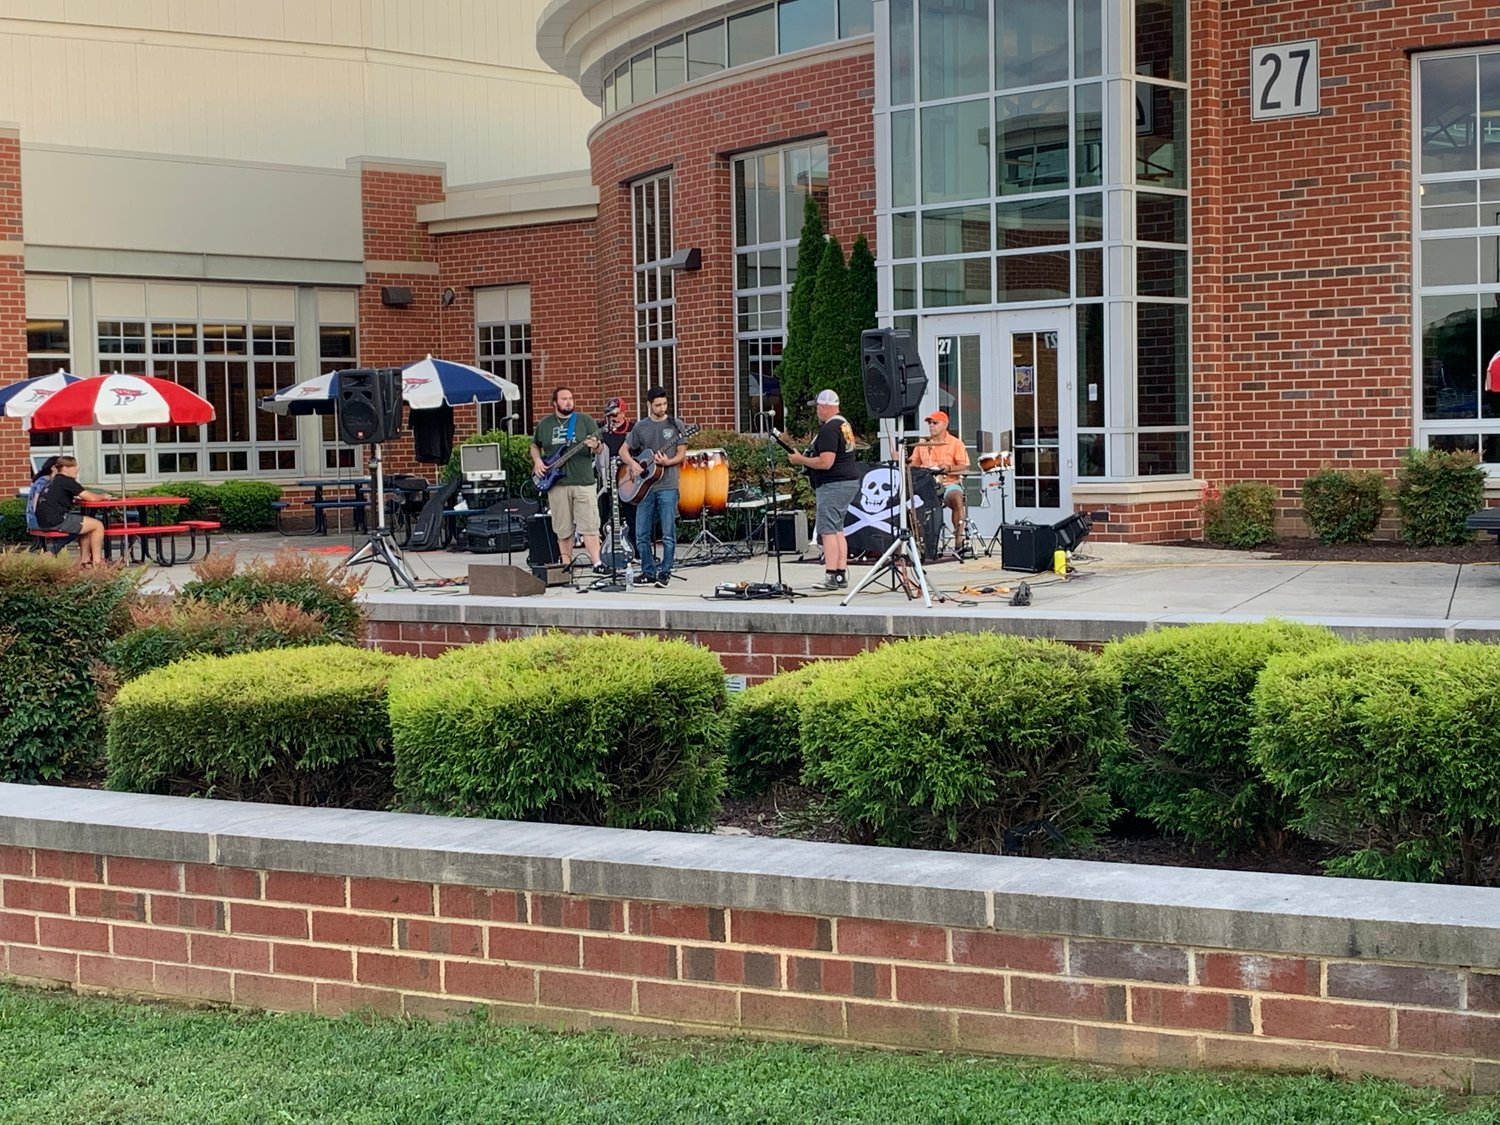 Band plays outside the school to entertain the attendees.